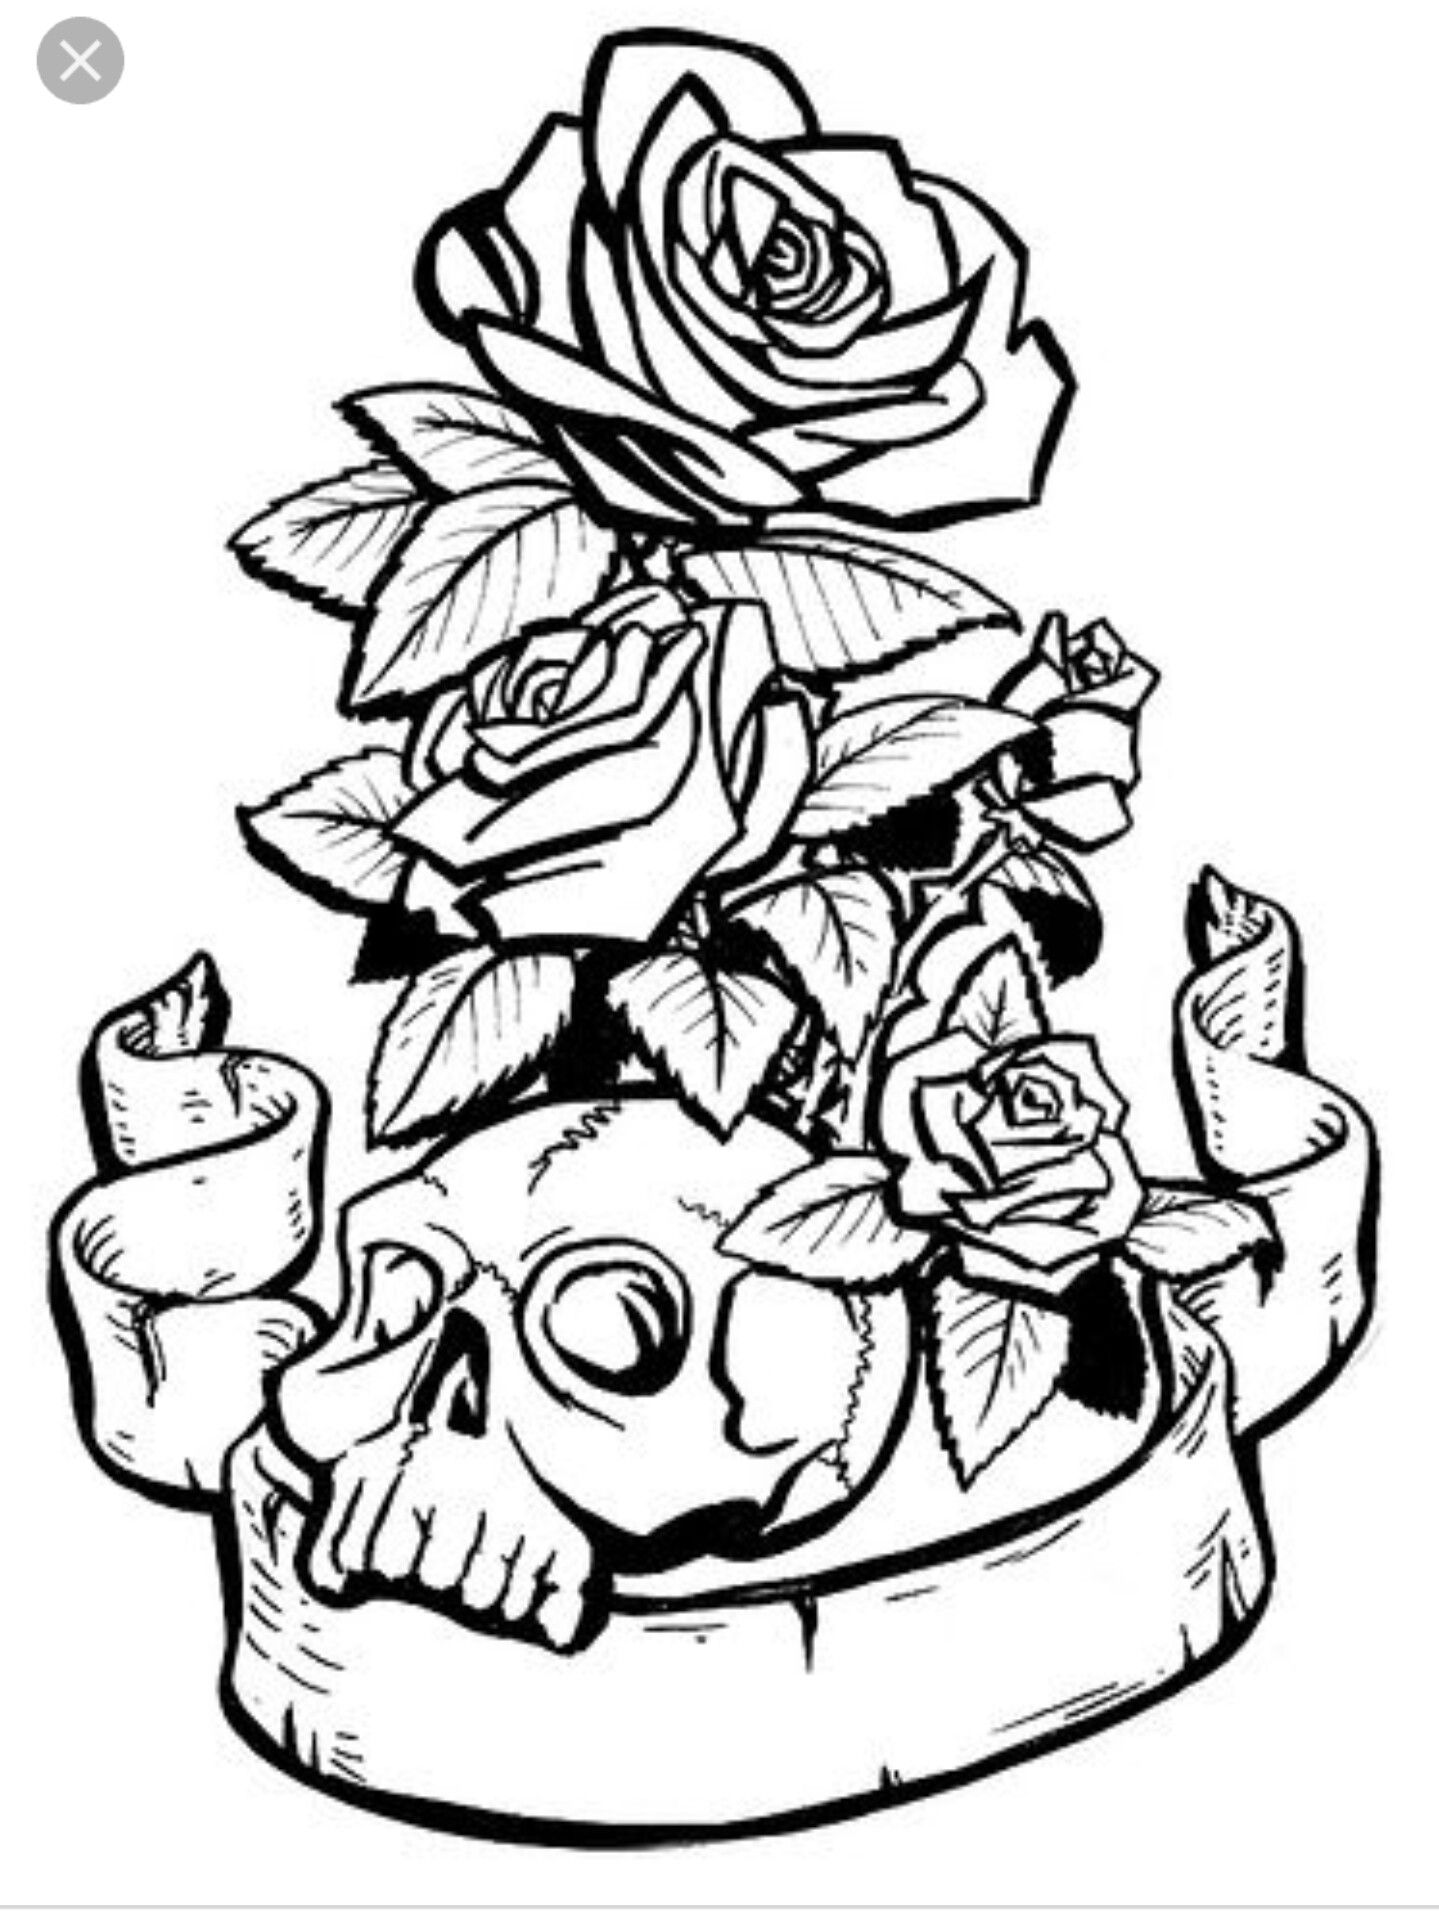 Skull And Roses Coloring Pages - Coloring Home